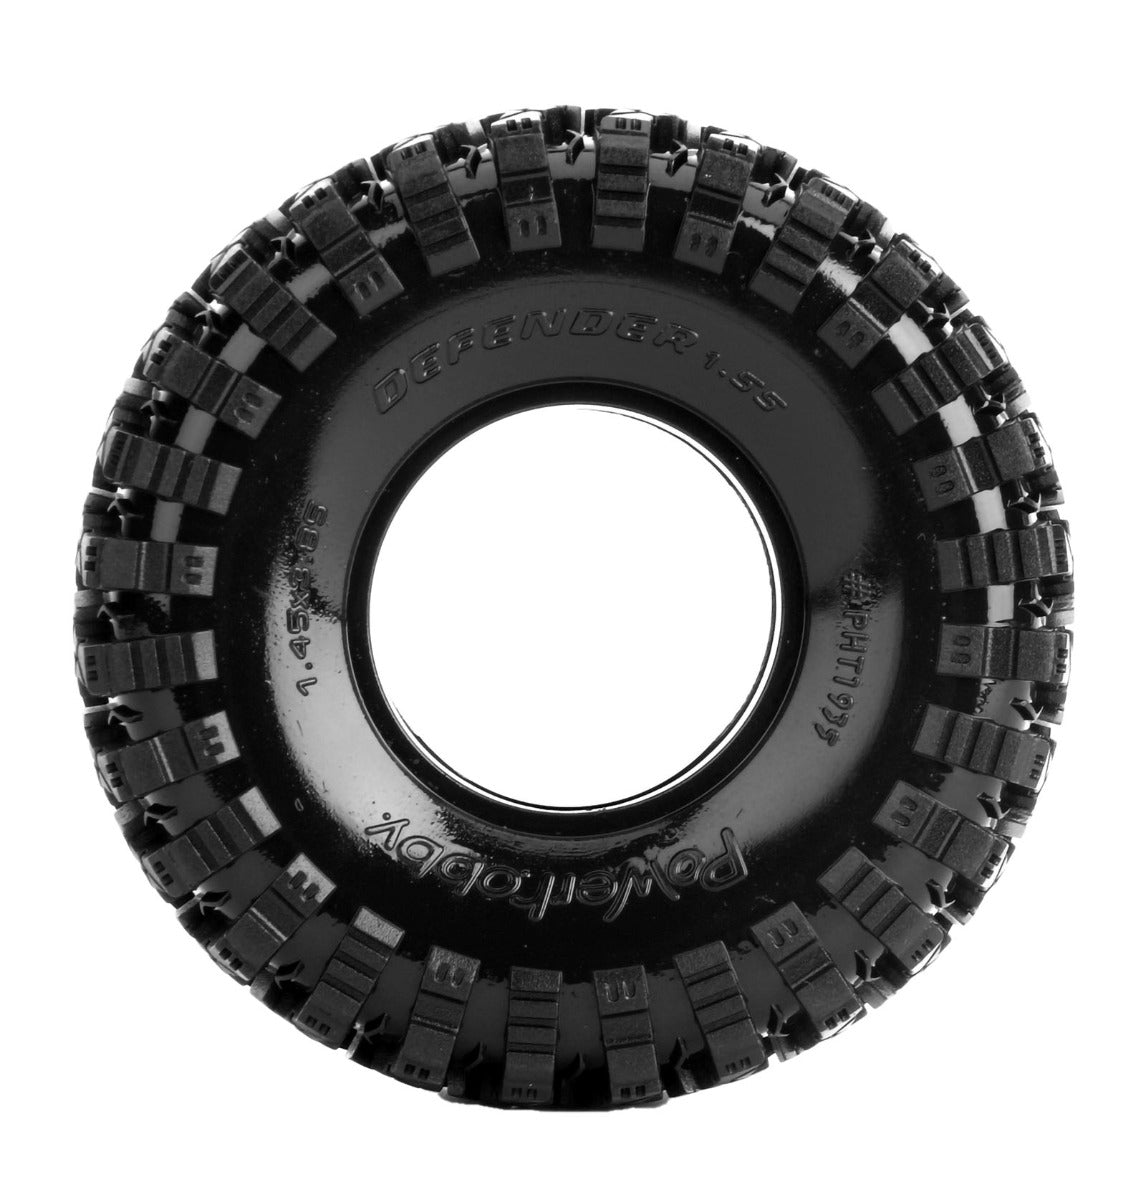 Powerhobby Defender 1.55 Crawler Tires with Dual Stage Soft and Medium Foams - PowerHobby